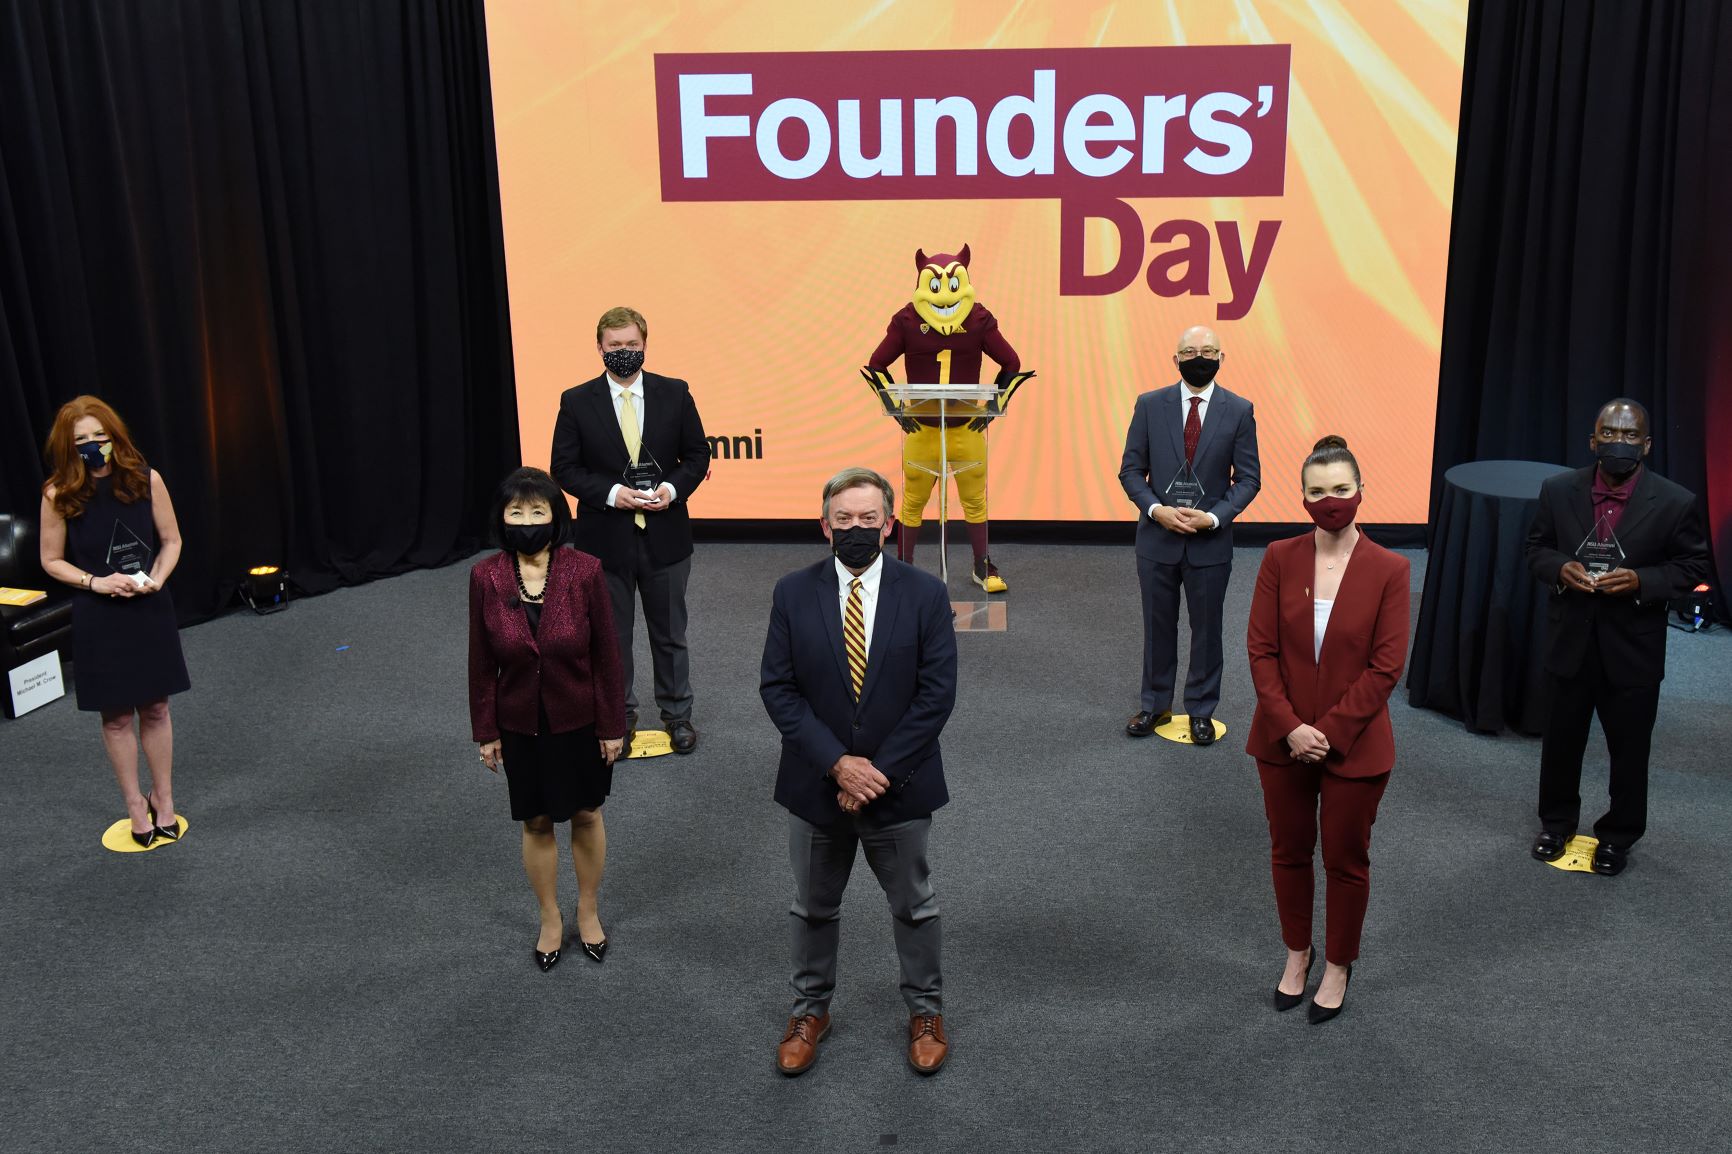 ASU 2021 Founders' Day celebrated innovators, entrepreneurs and